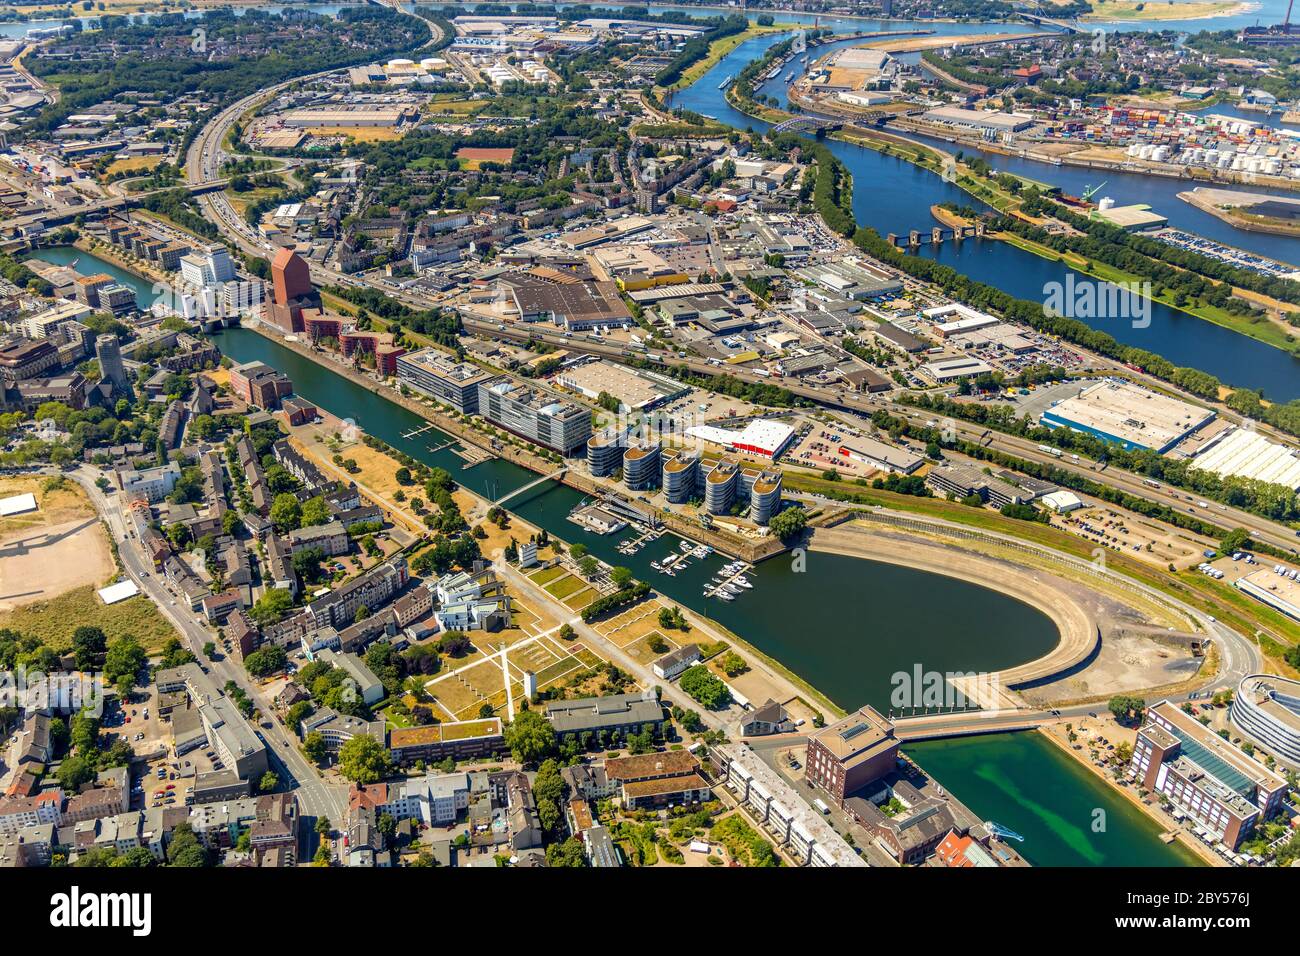 inner harbour of Duisburg with Five Boats and North Rhine-Westphalia State Archive, 22.07.2019, aerial view, Germany, North Rhine-Westphalia, Ruhr Area, Duisburg Stock Photo